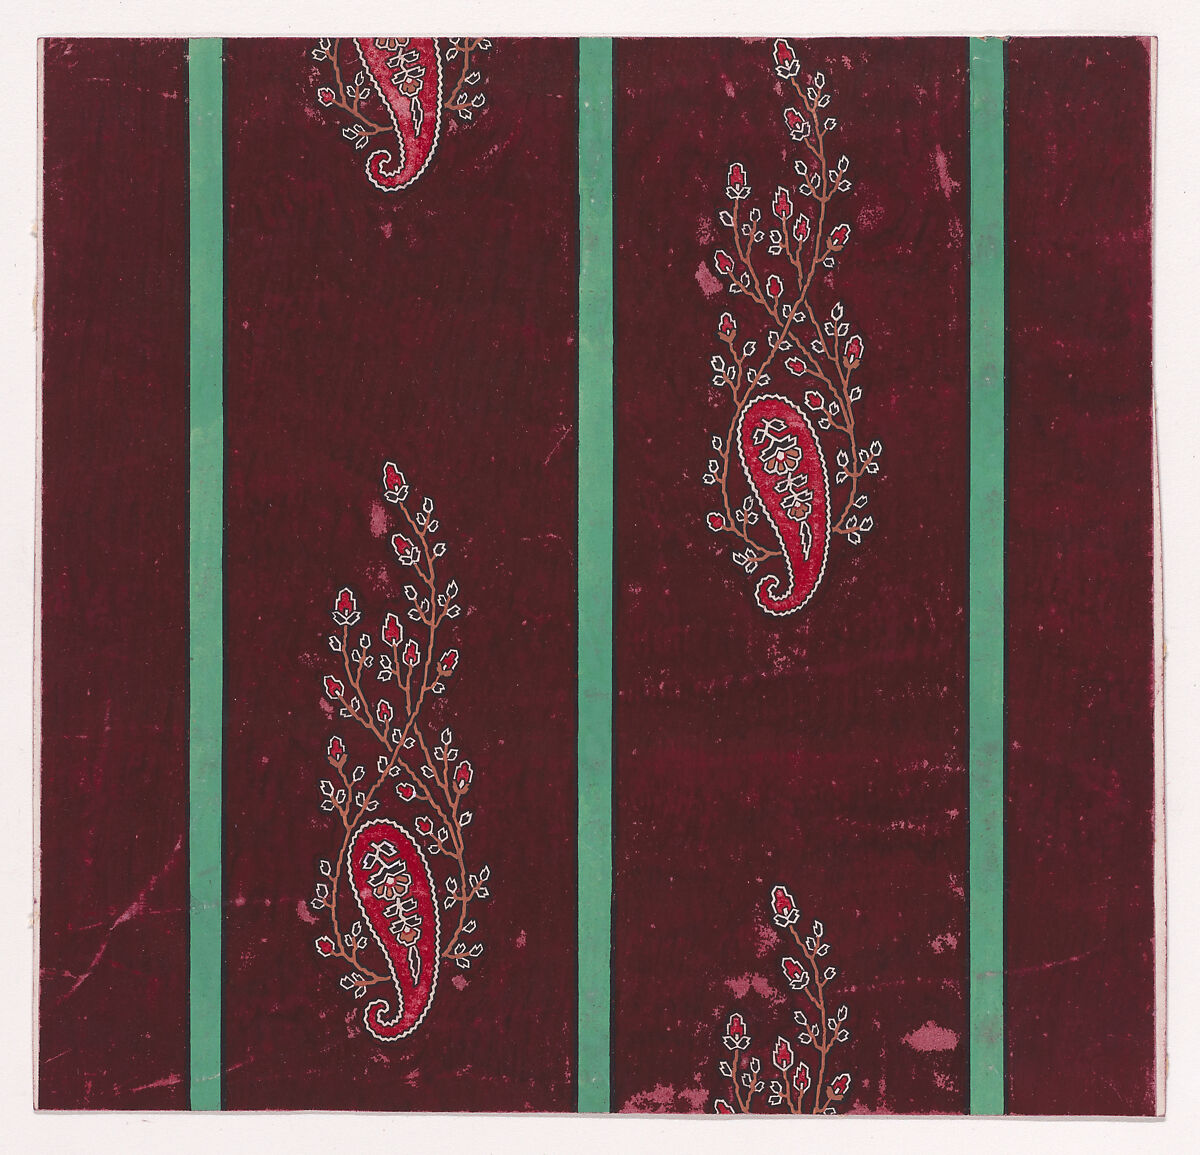 Textile Design with Vertical Rows of Paisley Motifs Flanked by Interlacing Branches with Stylized Flowers and Leaves Separated by Stripes, Anonymous, Alsatian, 19th century, Gouache 